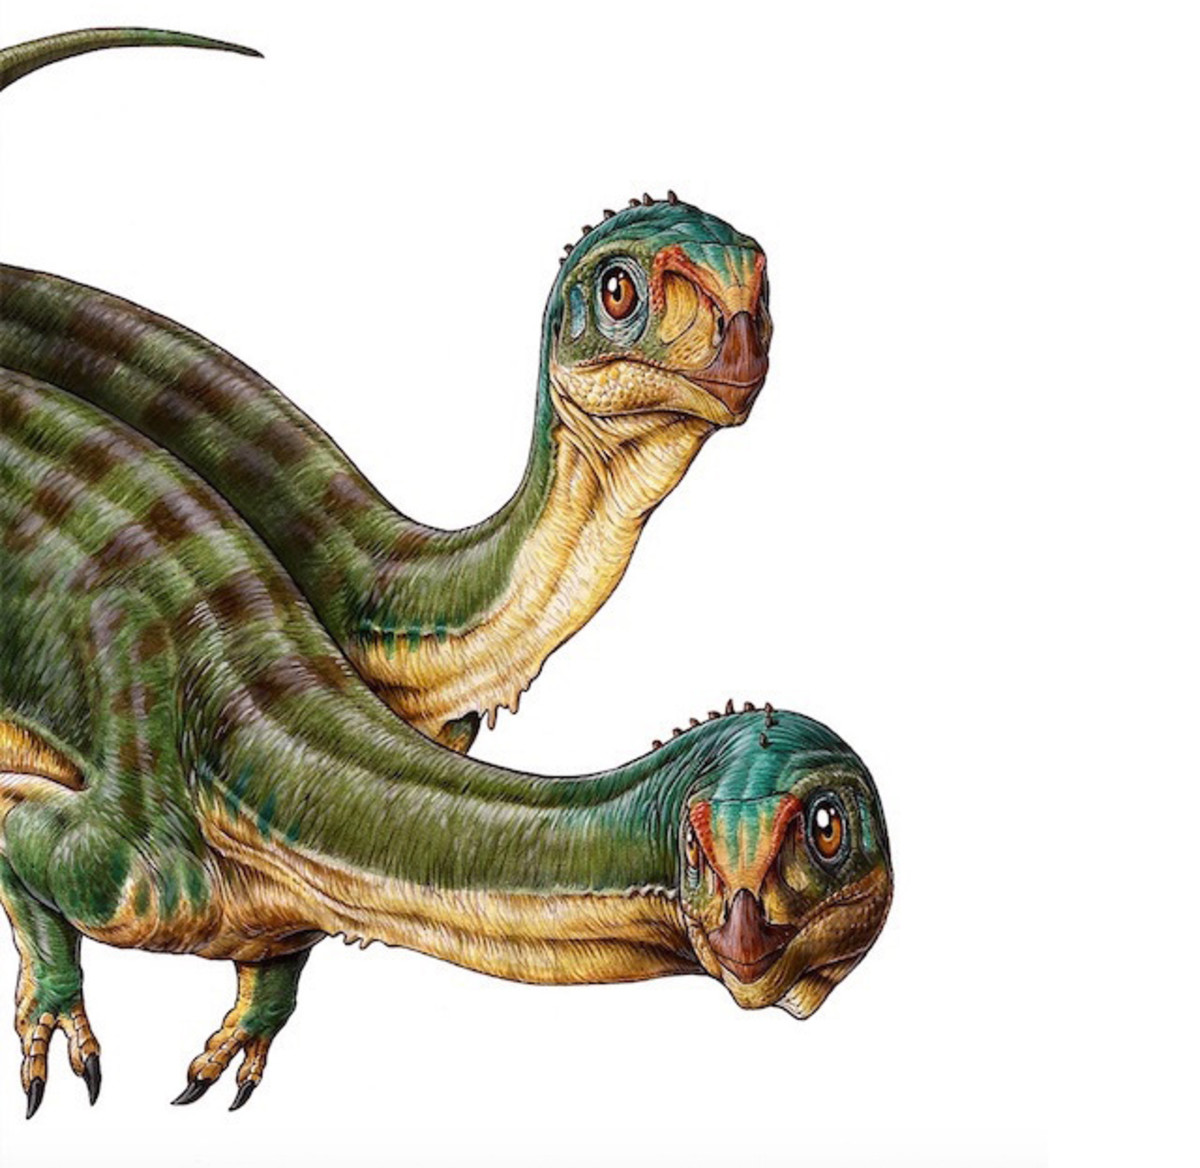 Dinosaur Discoveries of 2015